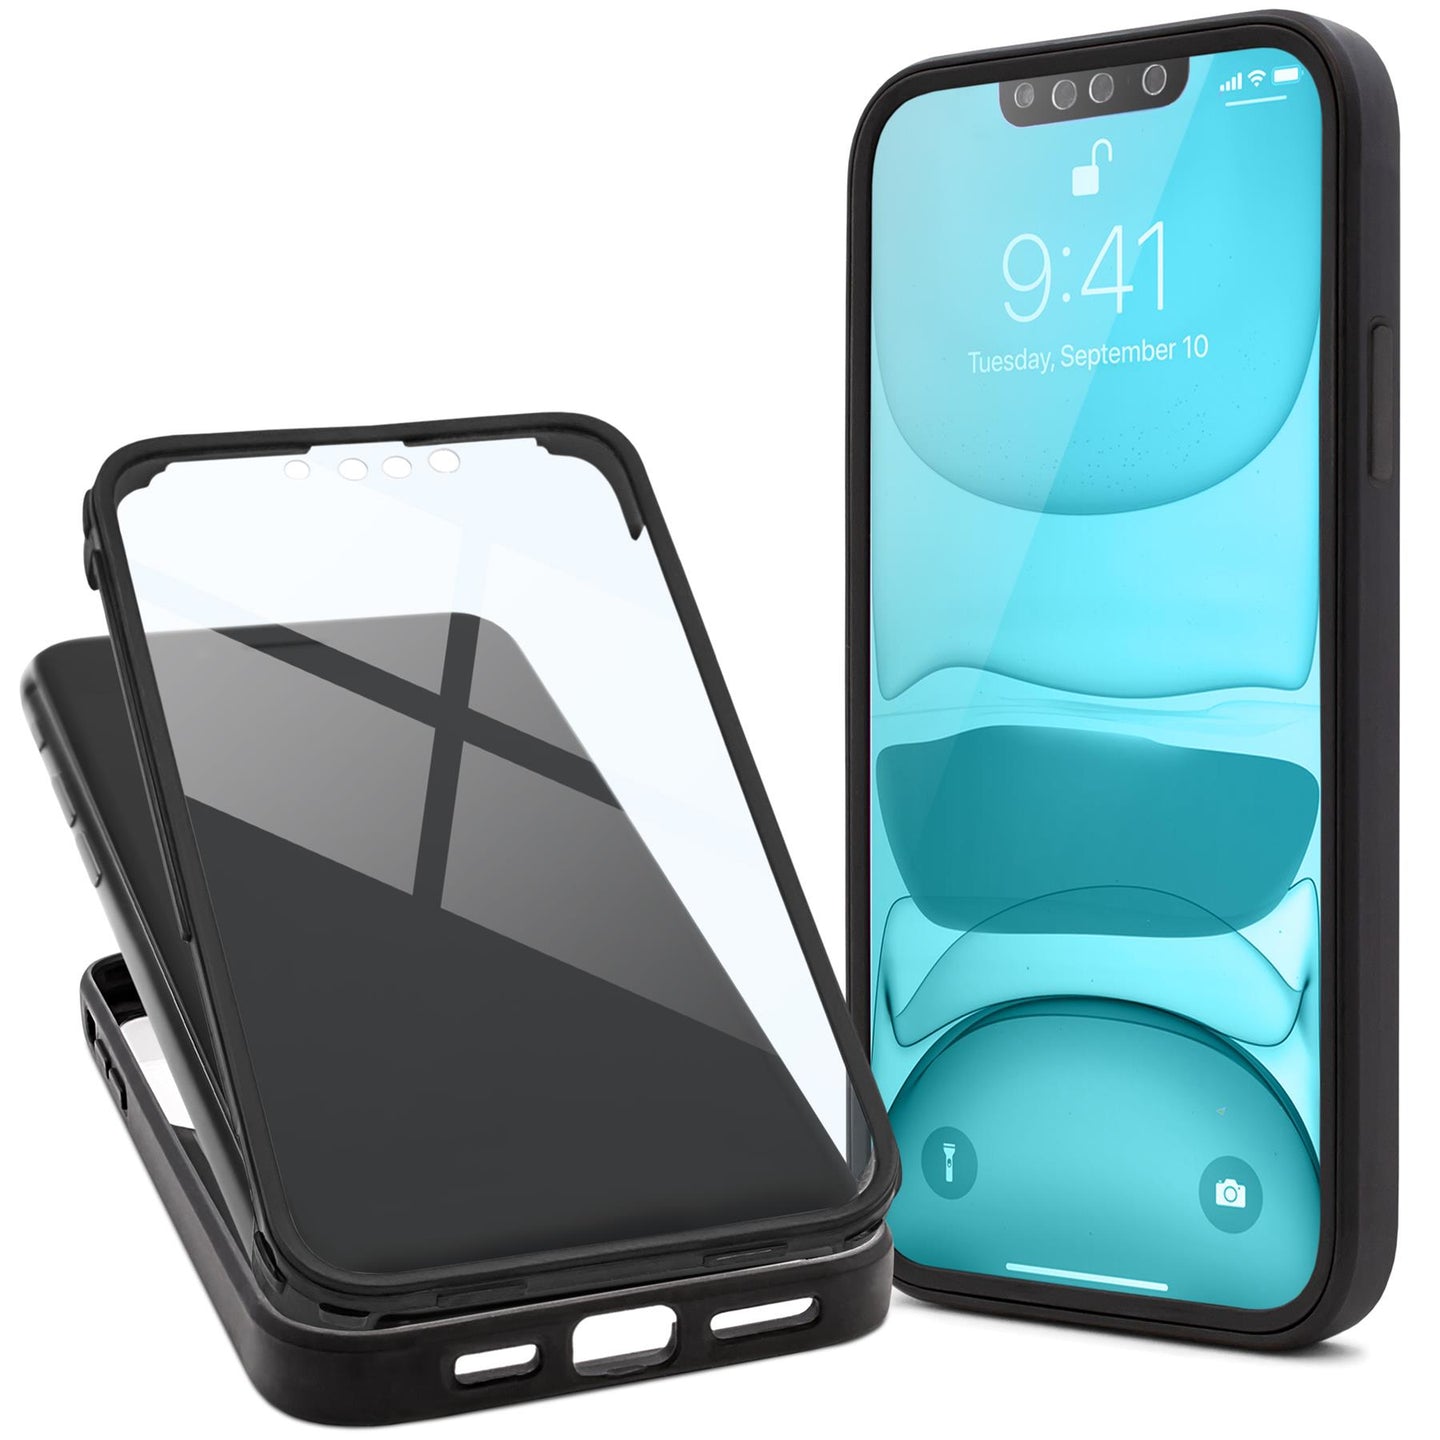 Moozy 360 Case for iPhone 14 - Black Rim Transparent Case, Full Body Double-sided Protection, Cover with Built-in Screen Protector